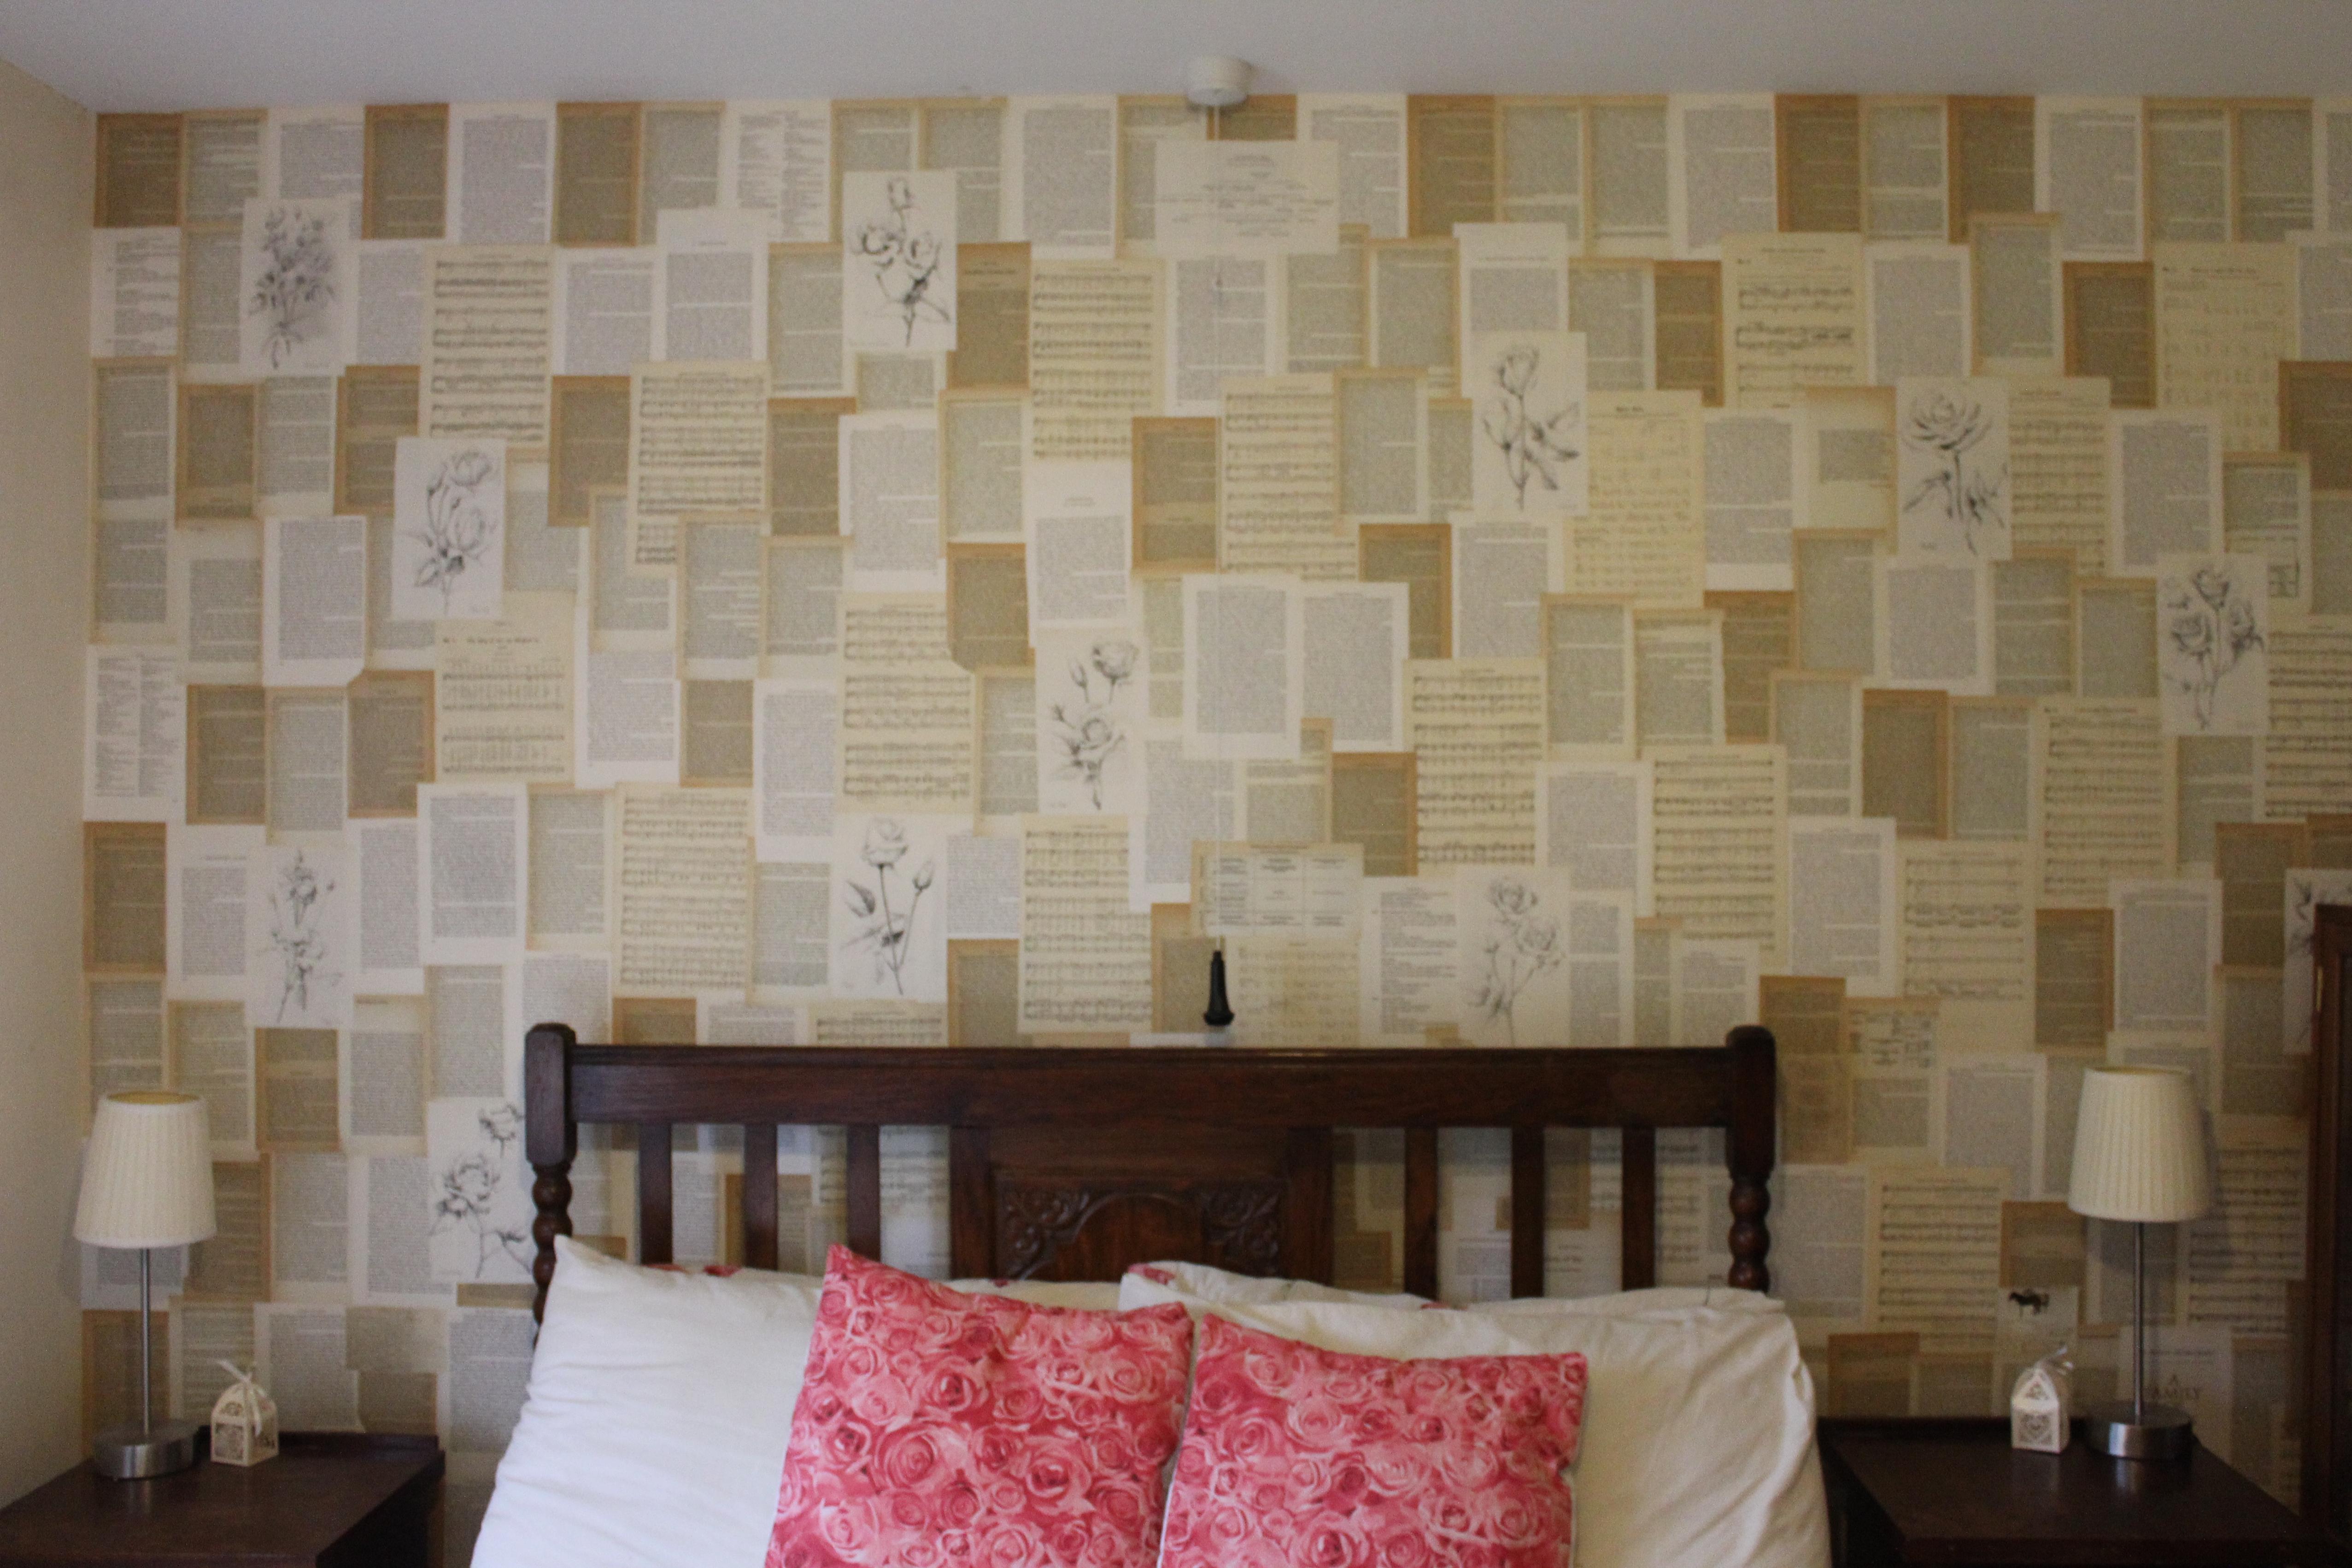 DIY wallpaper for bedroom makeover using pages from old books and sheet music